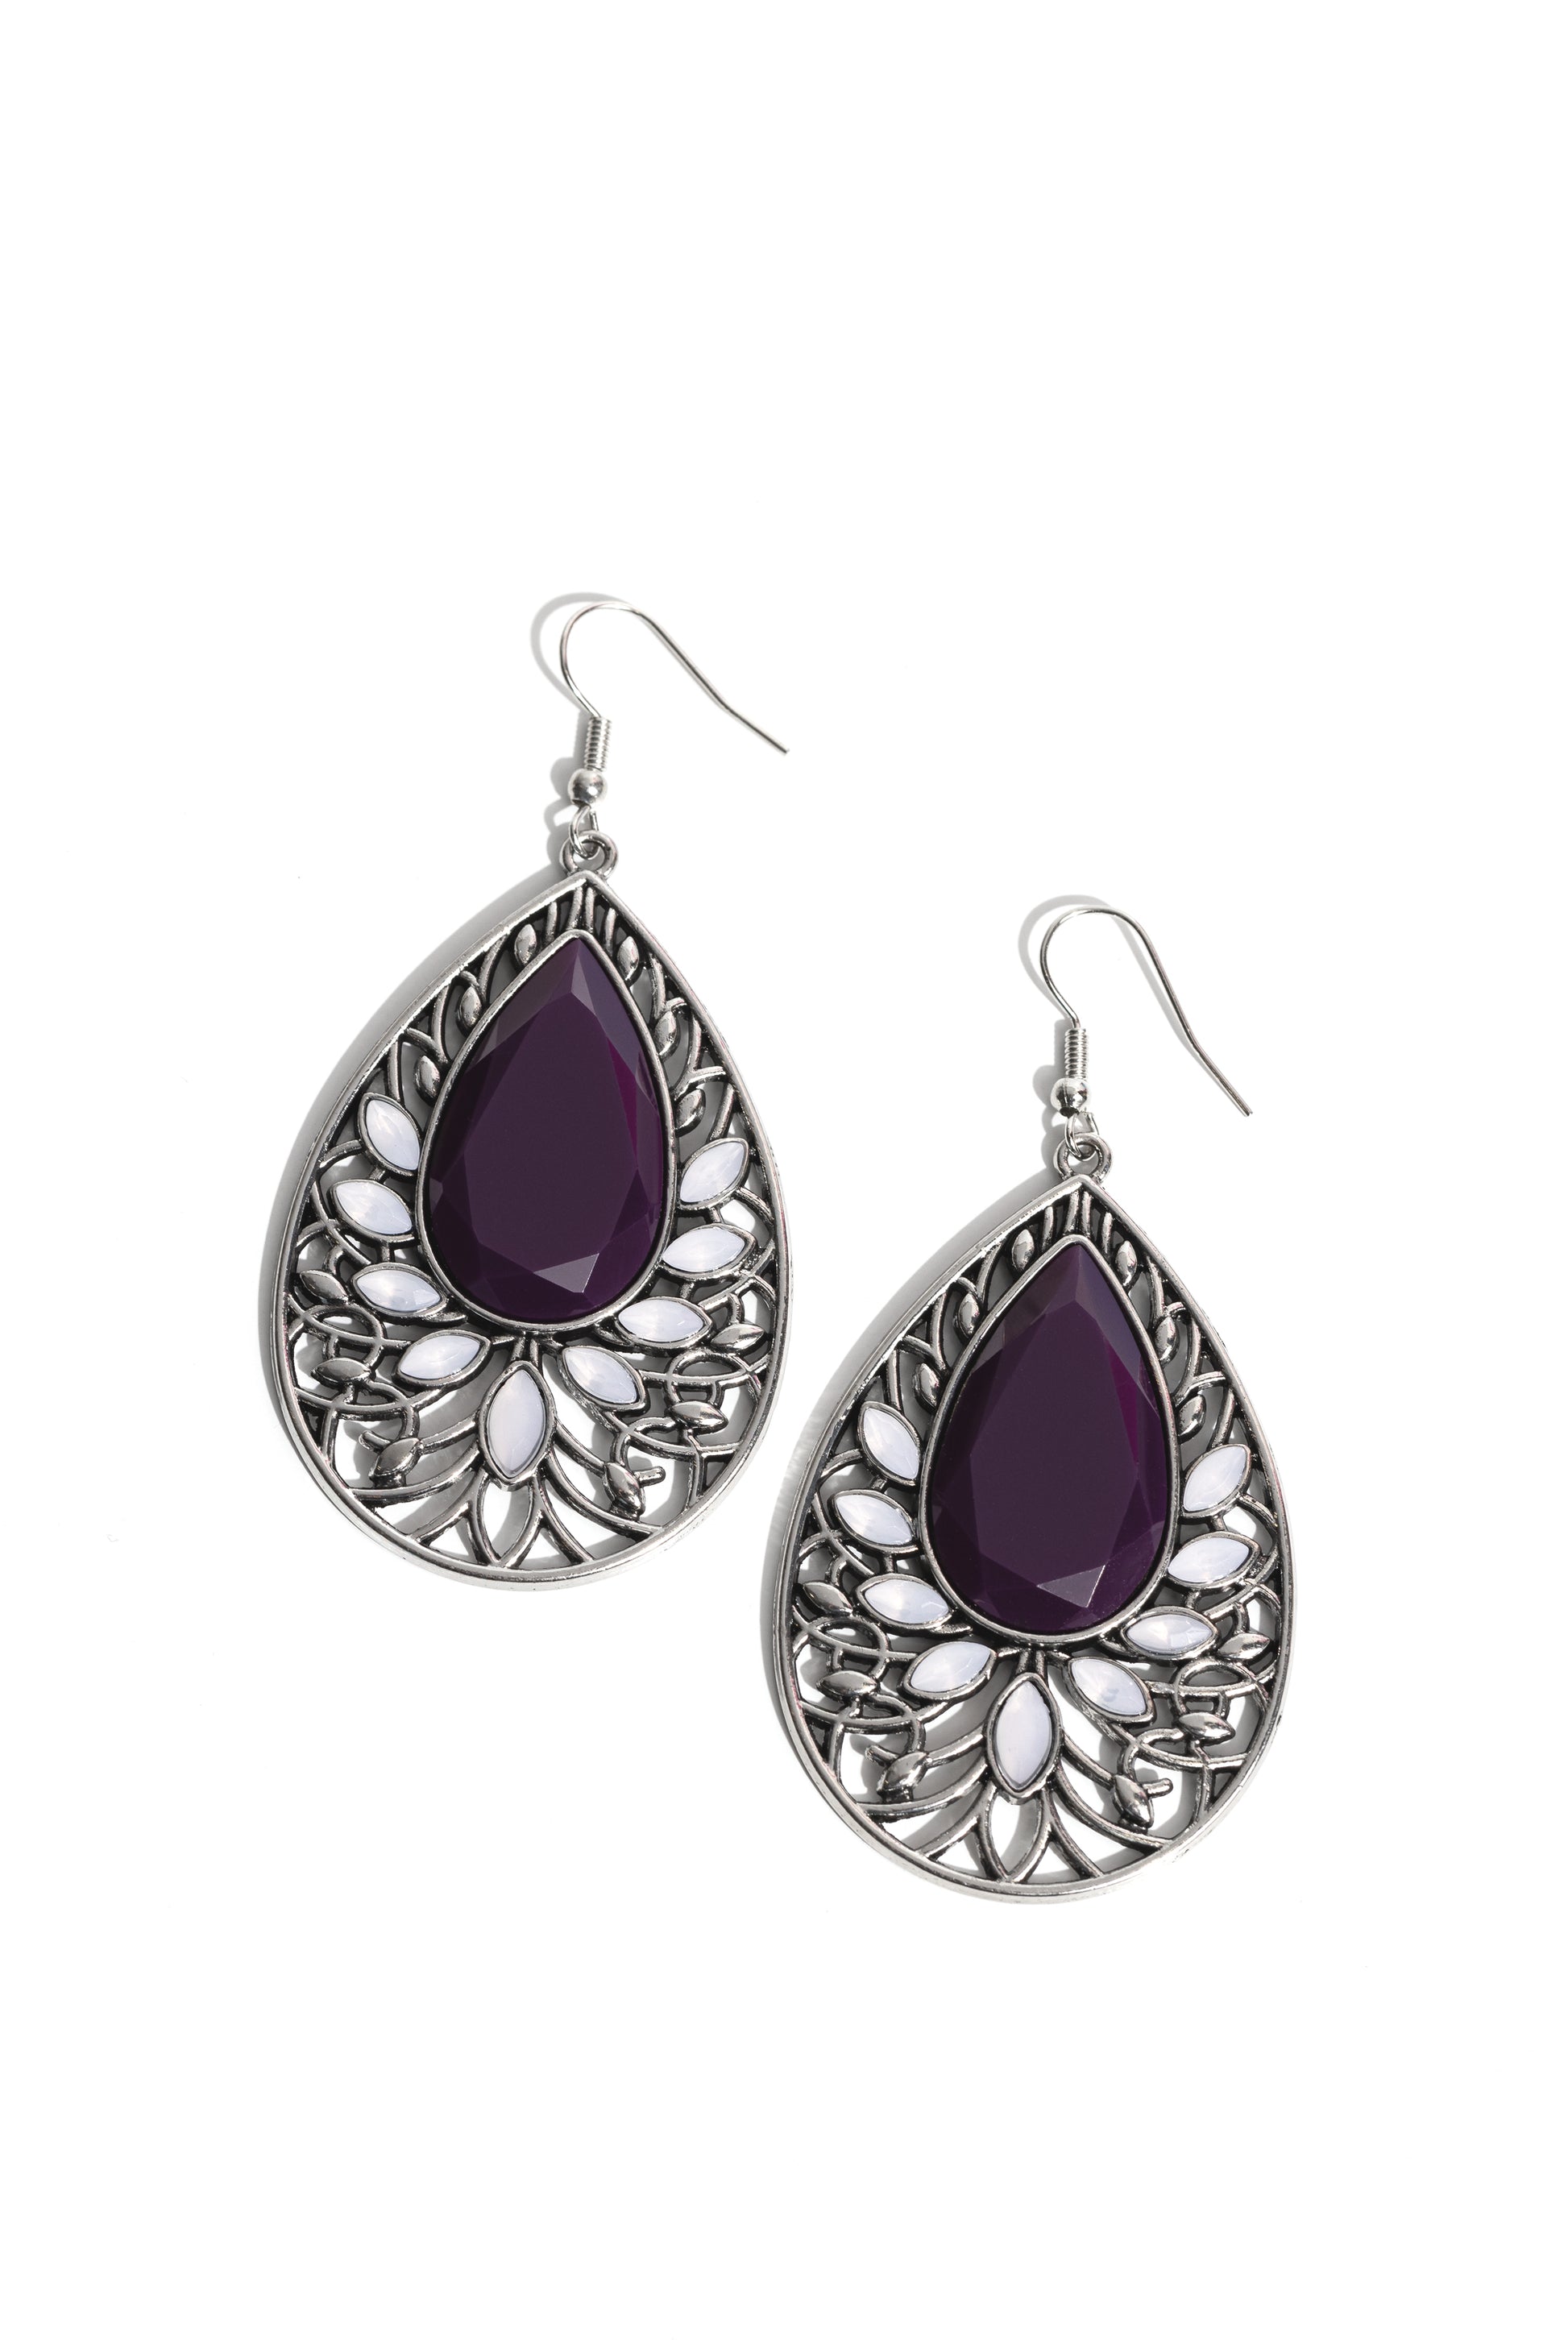 Floral Fairytale Purple Earring - Paparazzi Accessories  Marquise cut opalescent beads fan out from the bottom of an oversized plum teardrop bead atop a leafy silver backdrop, resulting in a whimsical floral frame. Earring attaches to a standard fishhook fitting.  Sold as one pair of earrings.  New Kit Sku:  P5ST-PRXX-016XX